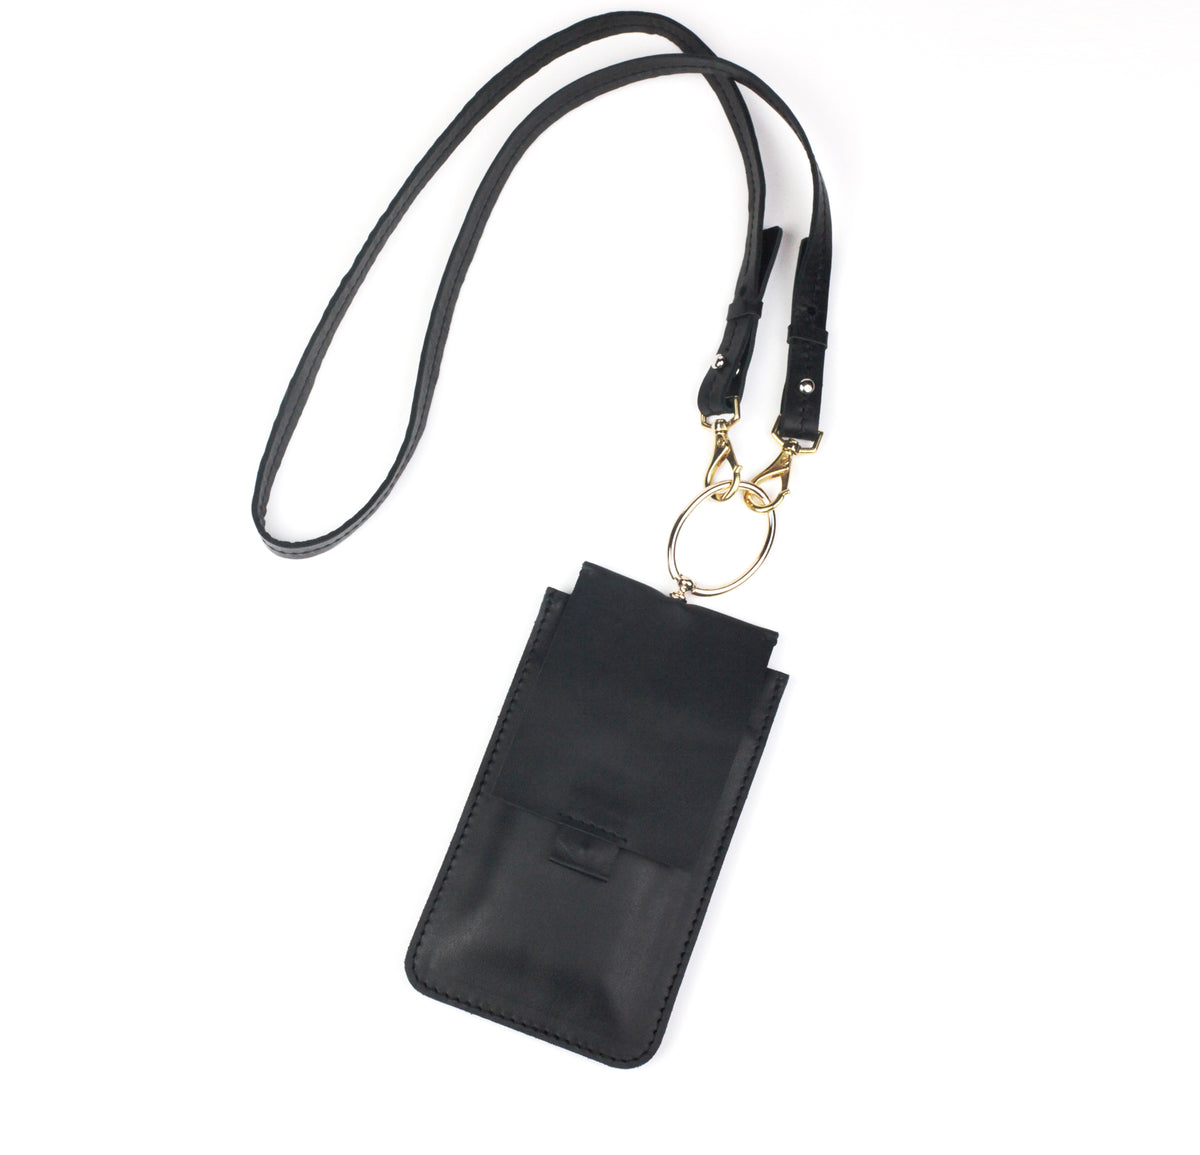 IPhone Sling + – Sunny Side Up